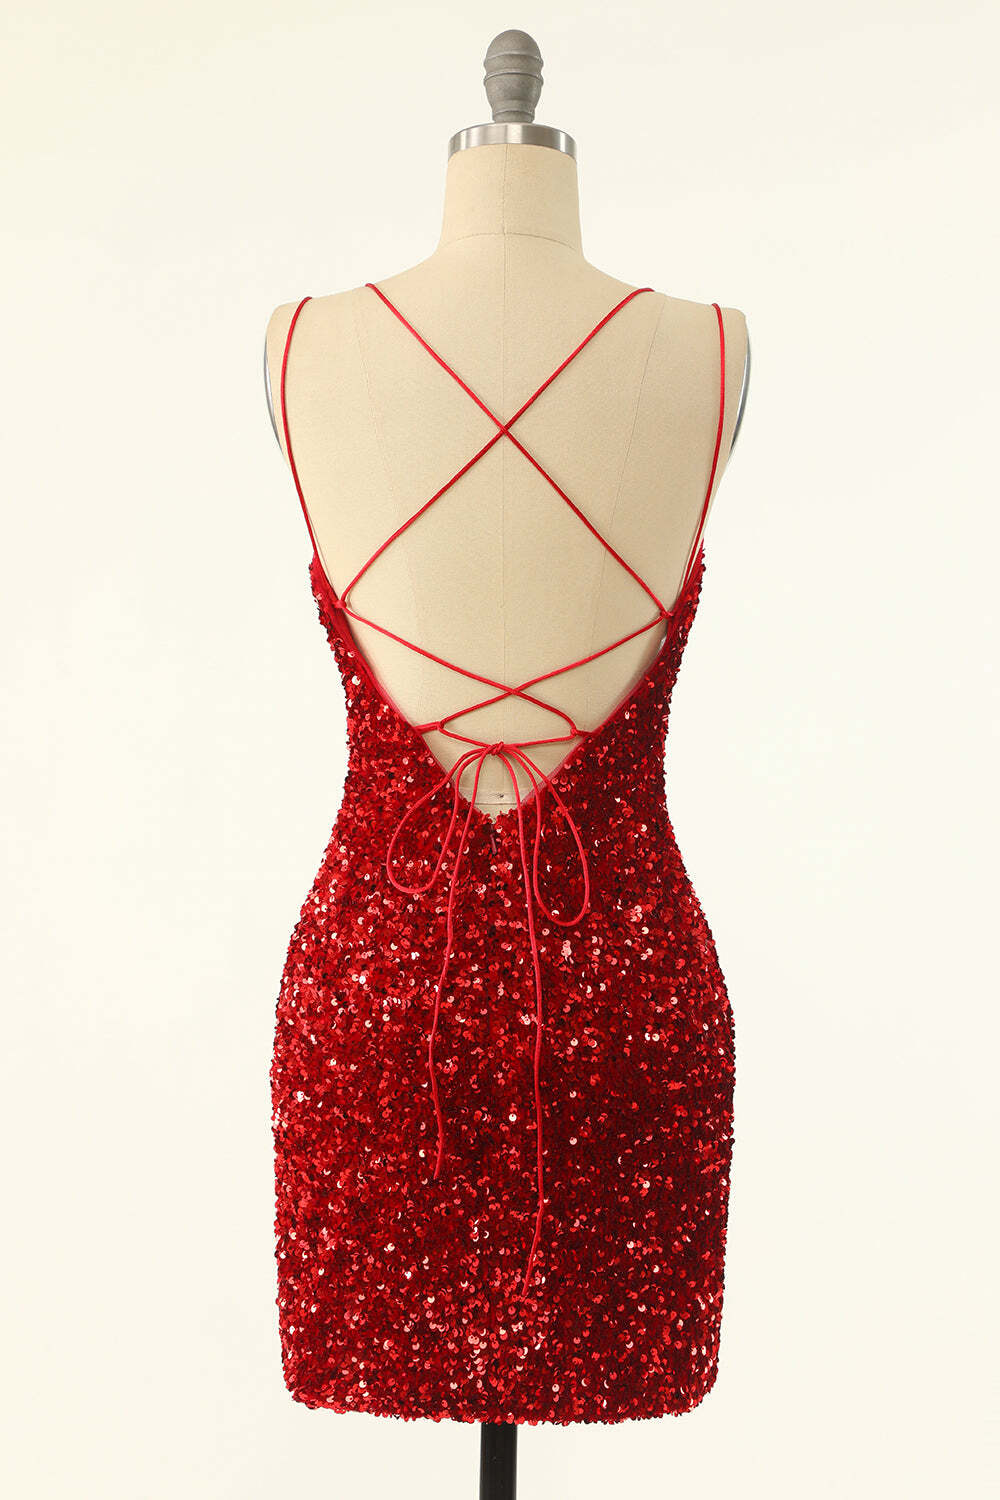 Double Straps Red Sequin Bodycon Mini Homecoming Dress